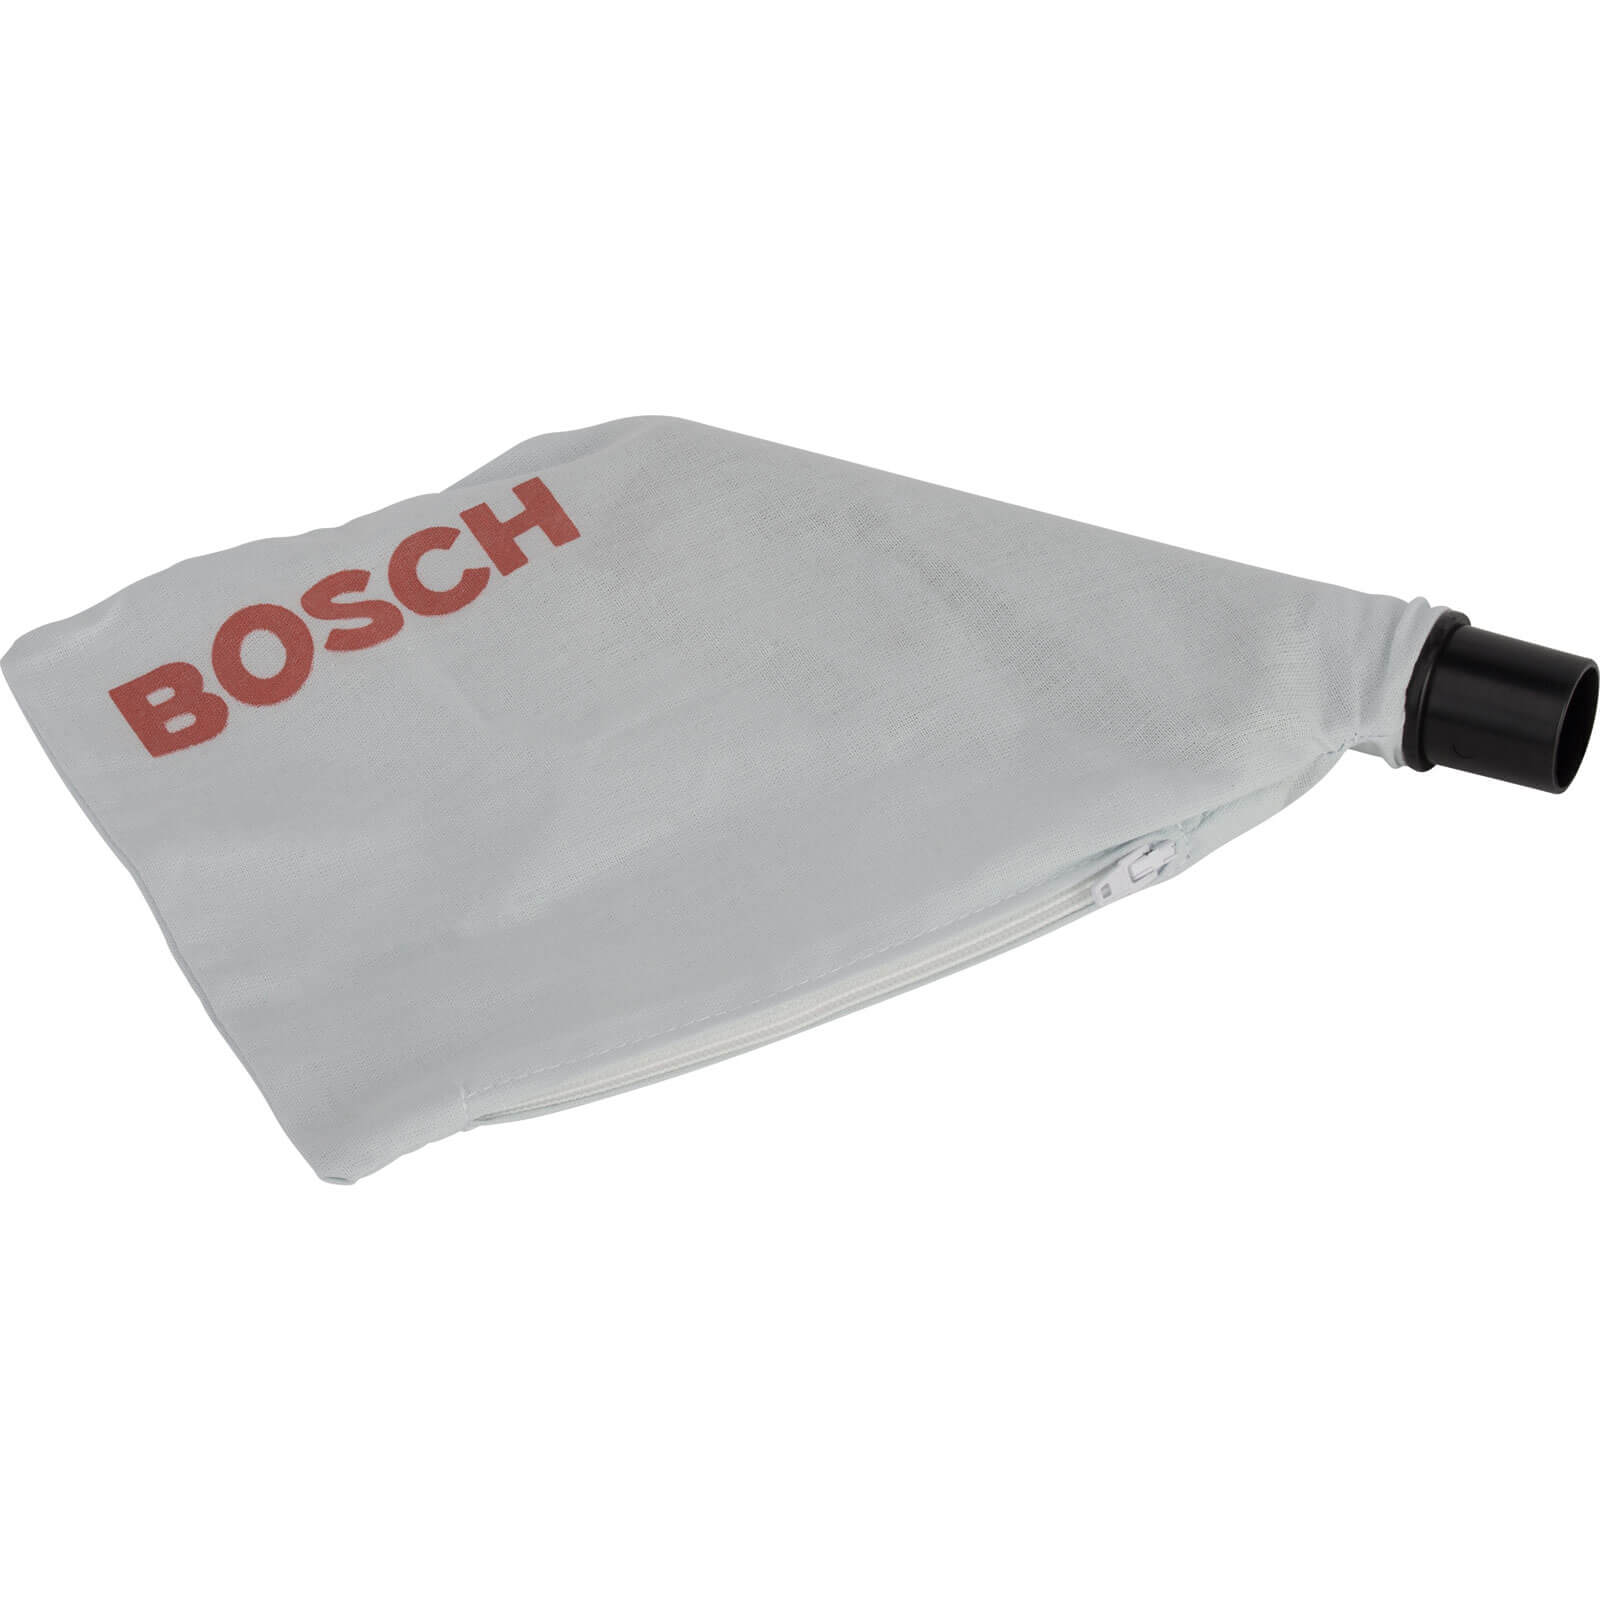 Image of Bosch Dust Bag for GFF 22A Biscuit Jointers